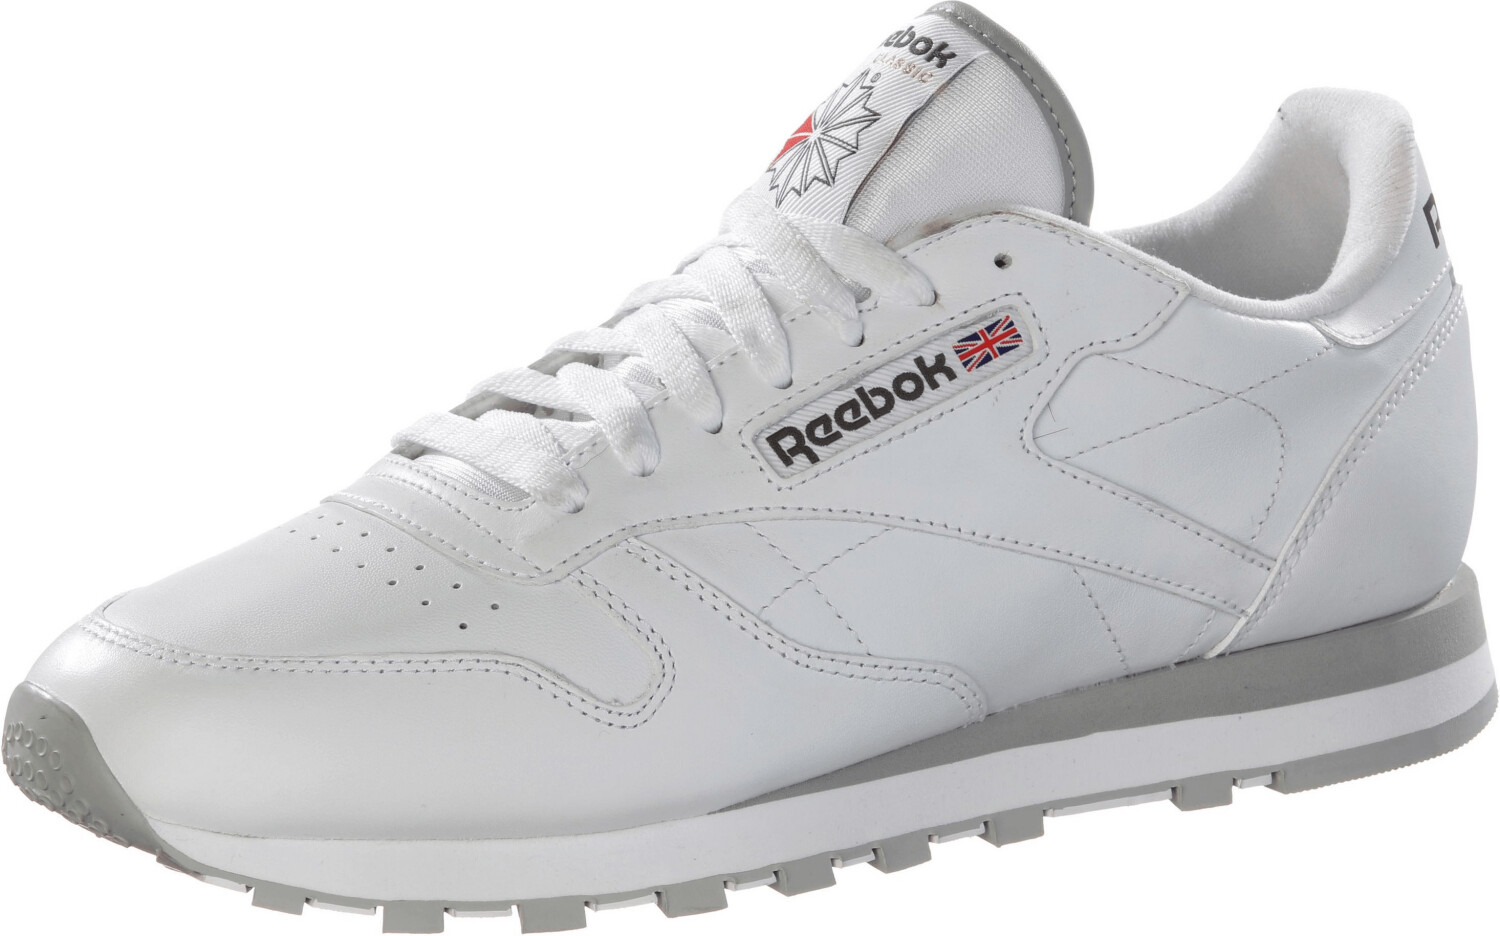 Buy Reebok Classic Leather from £26.99 